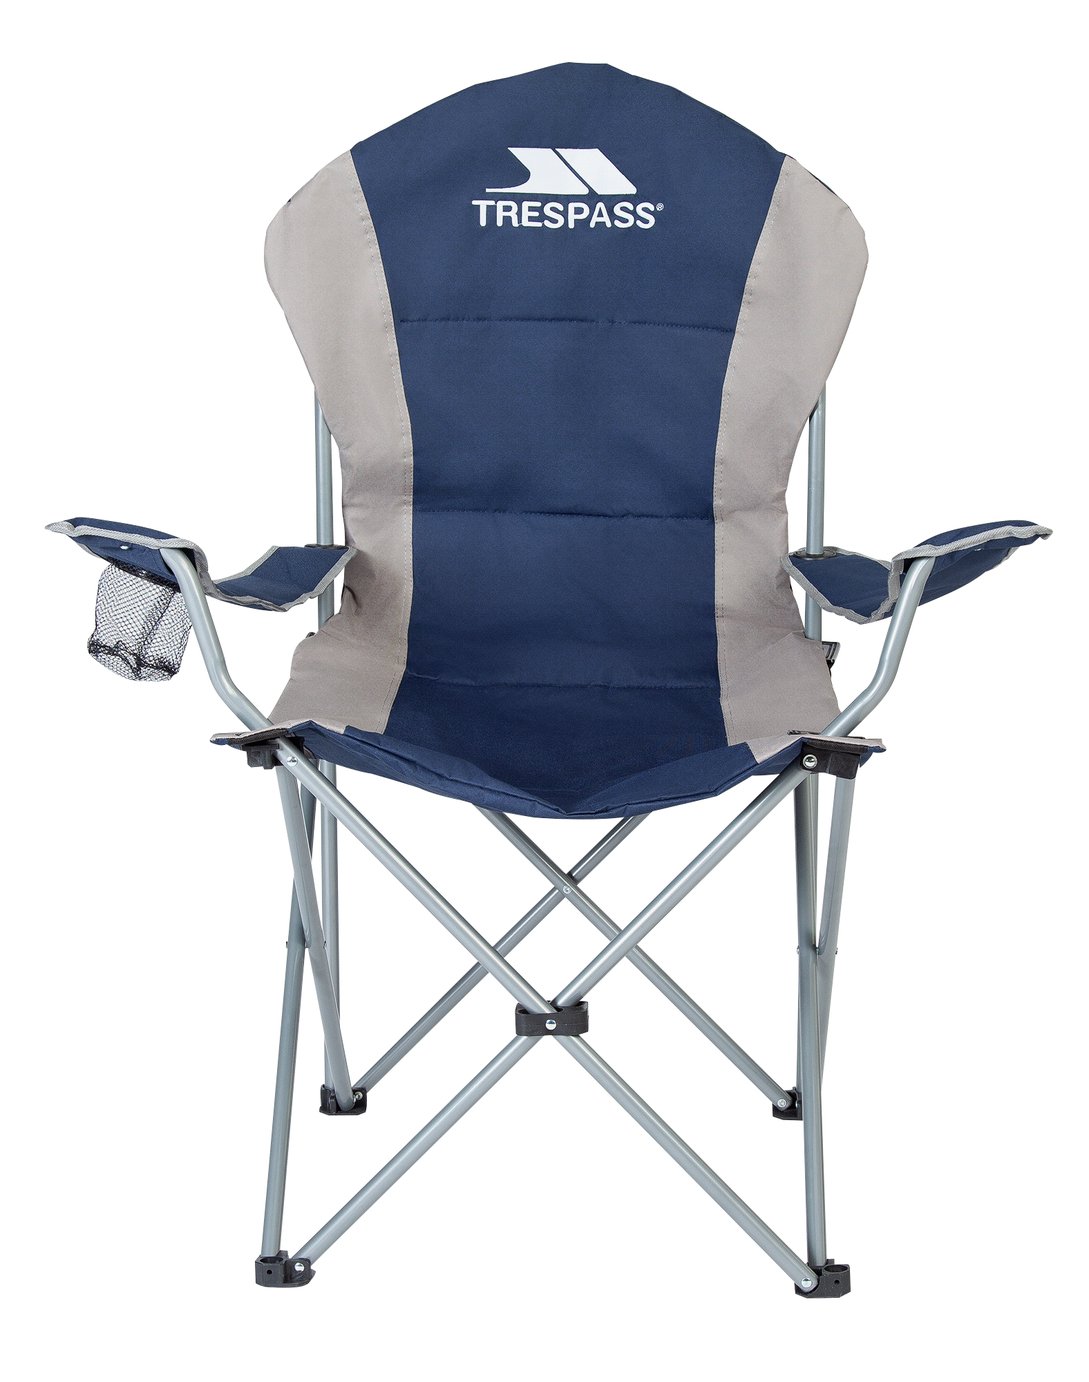 Trespass High Back Padded Camping Chair